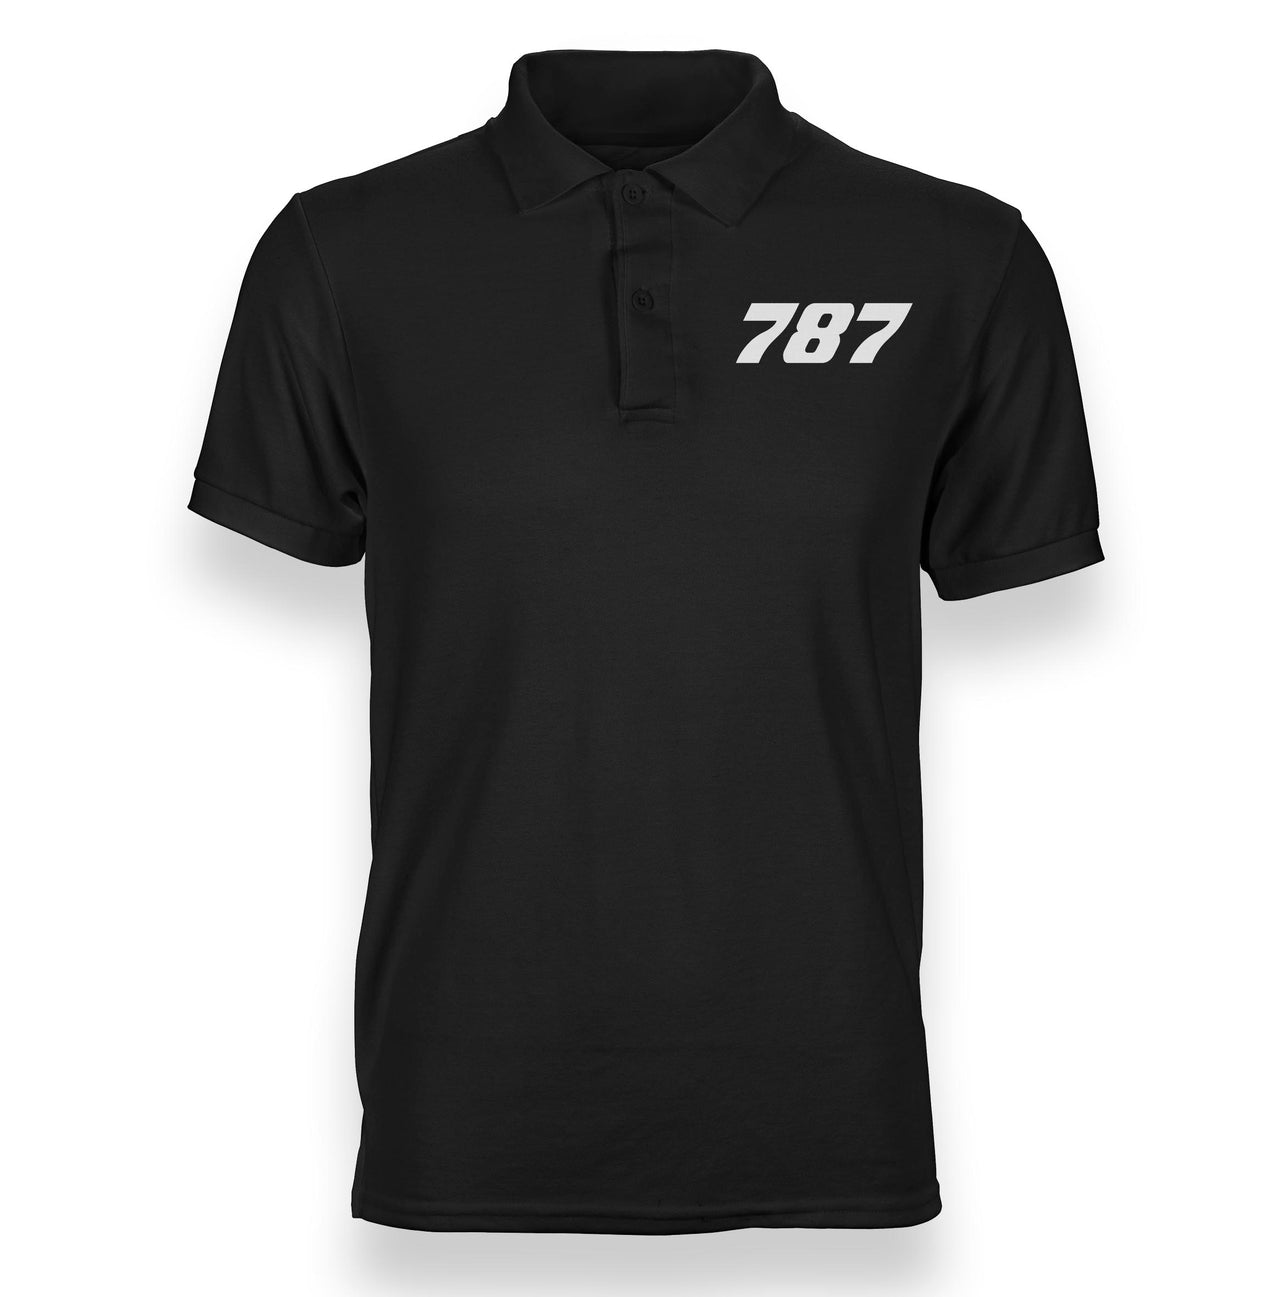 Boeing 787 Flat Text Designed Polo T-Shirts